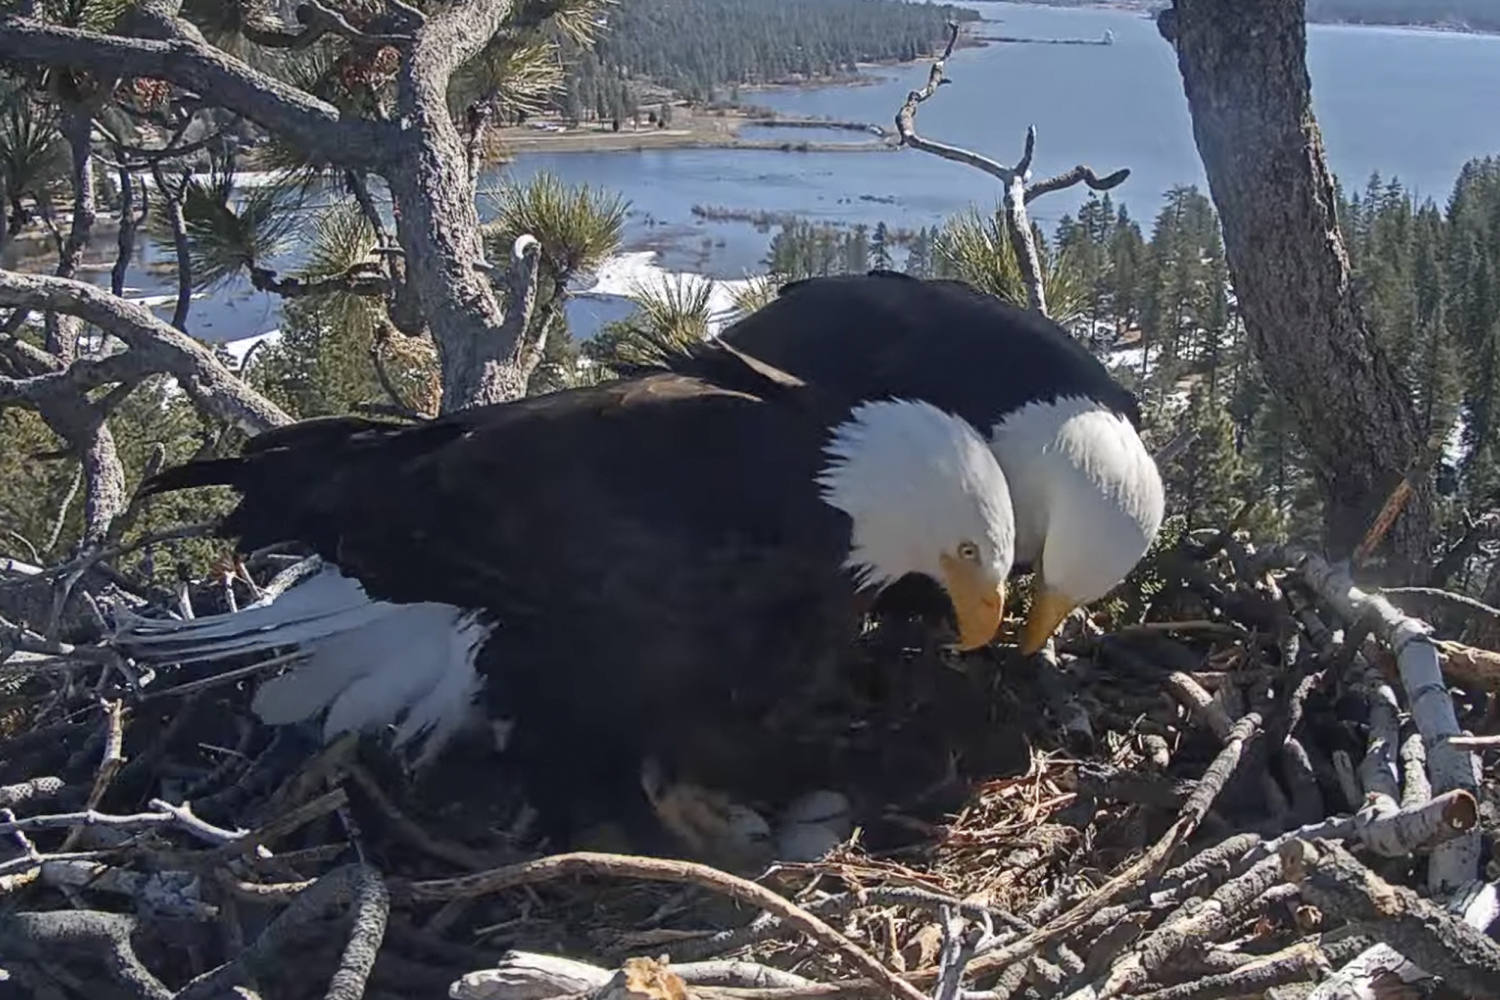 Hatch watch: Bald eagle chicks expected to emerge on livestream from Southern California mountains